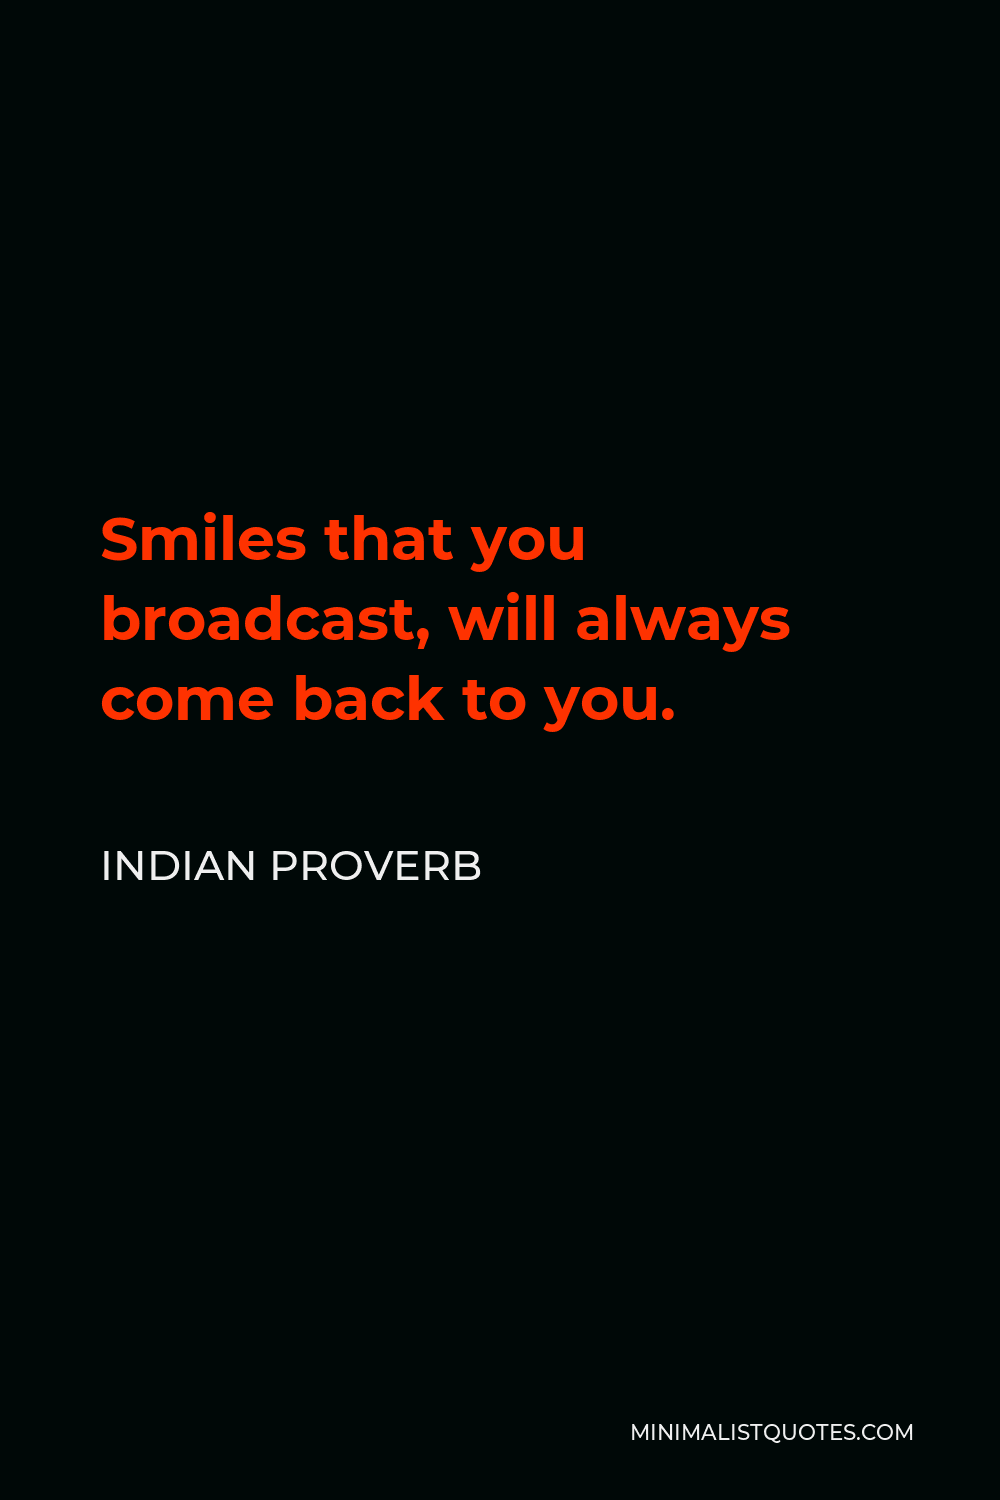 Indian Proverb Quote - Smiles that you broadcast, will always come back to you.